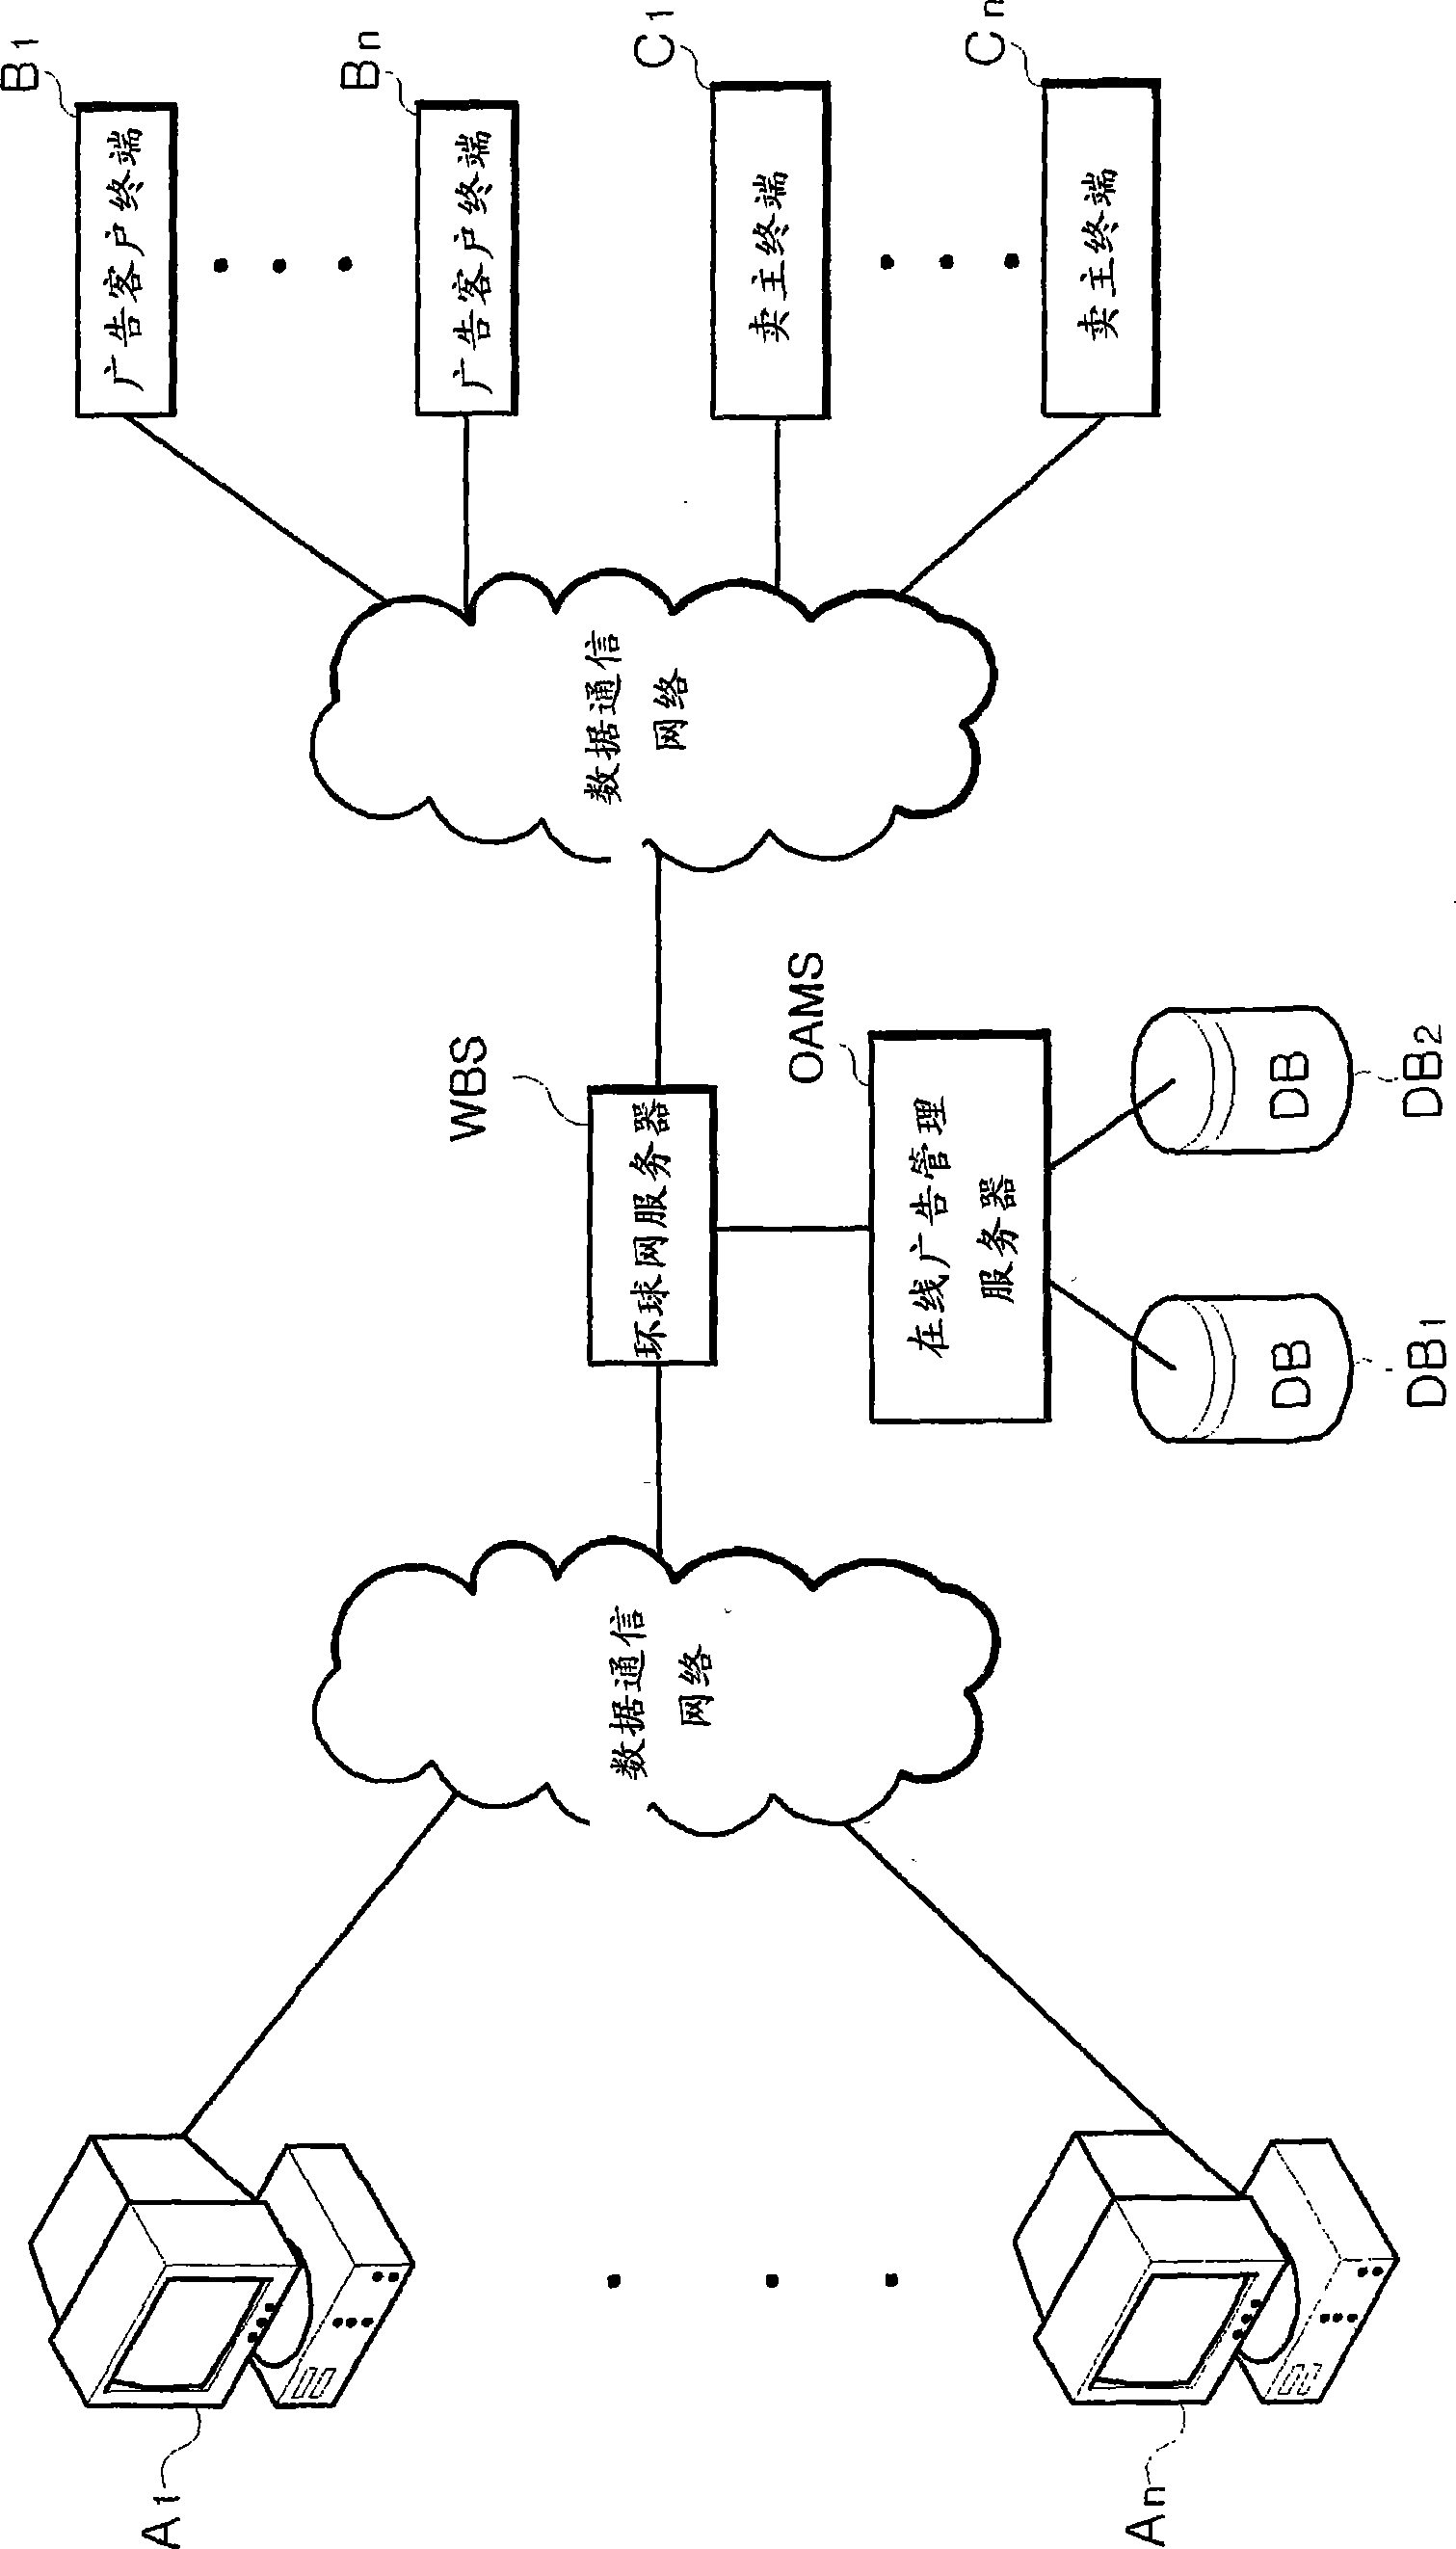 On-line advertising system and method of the same